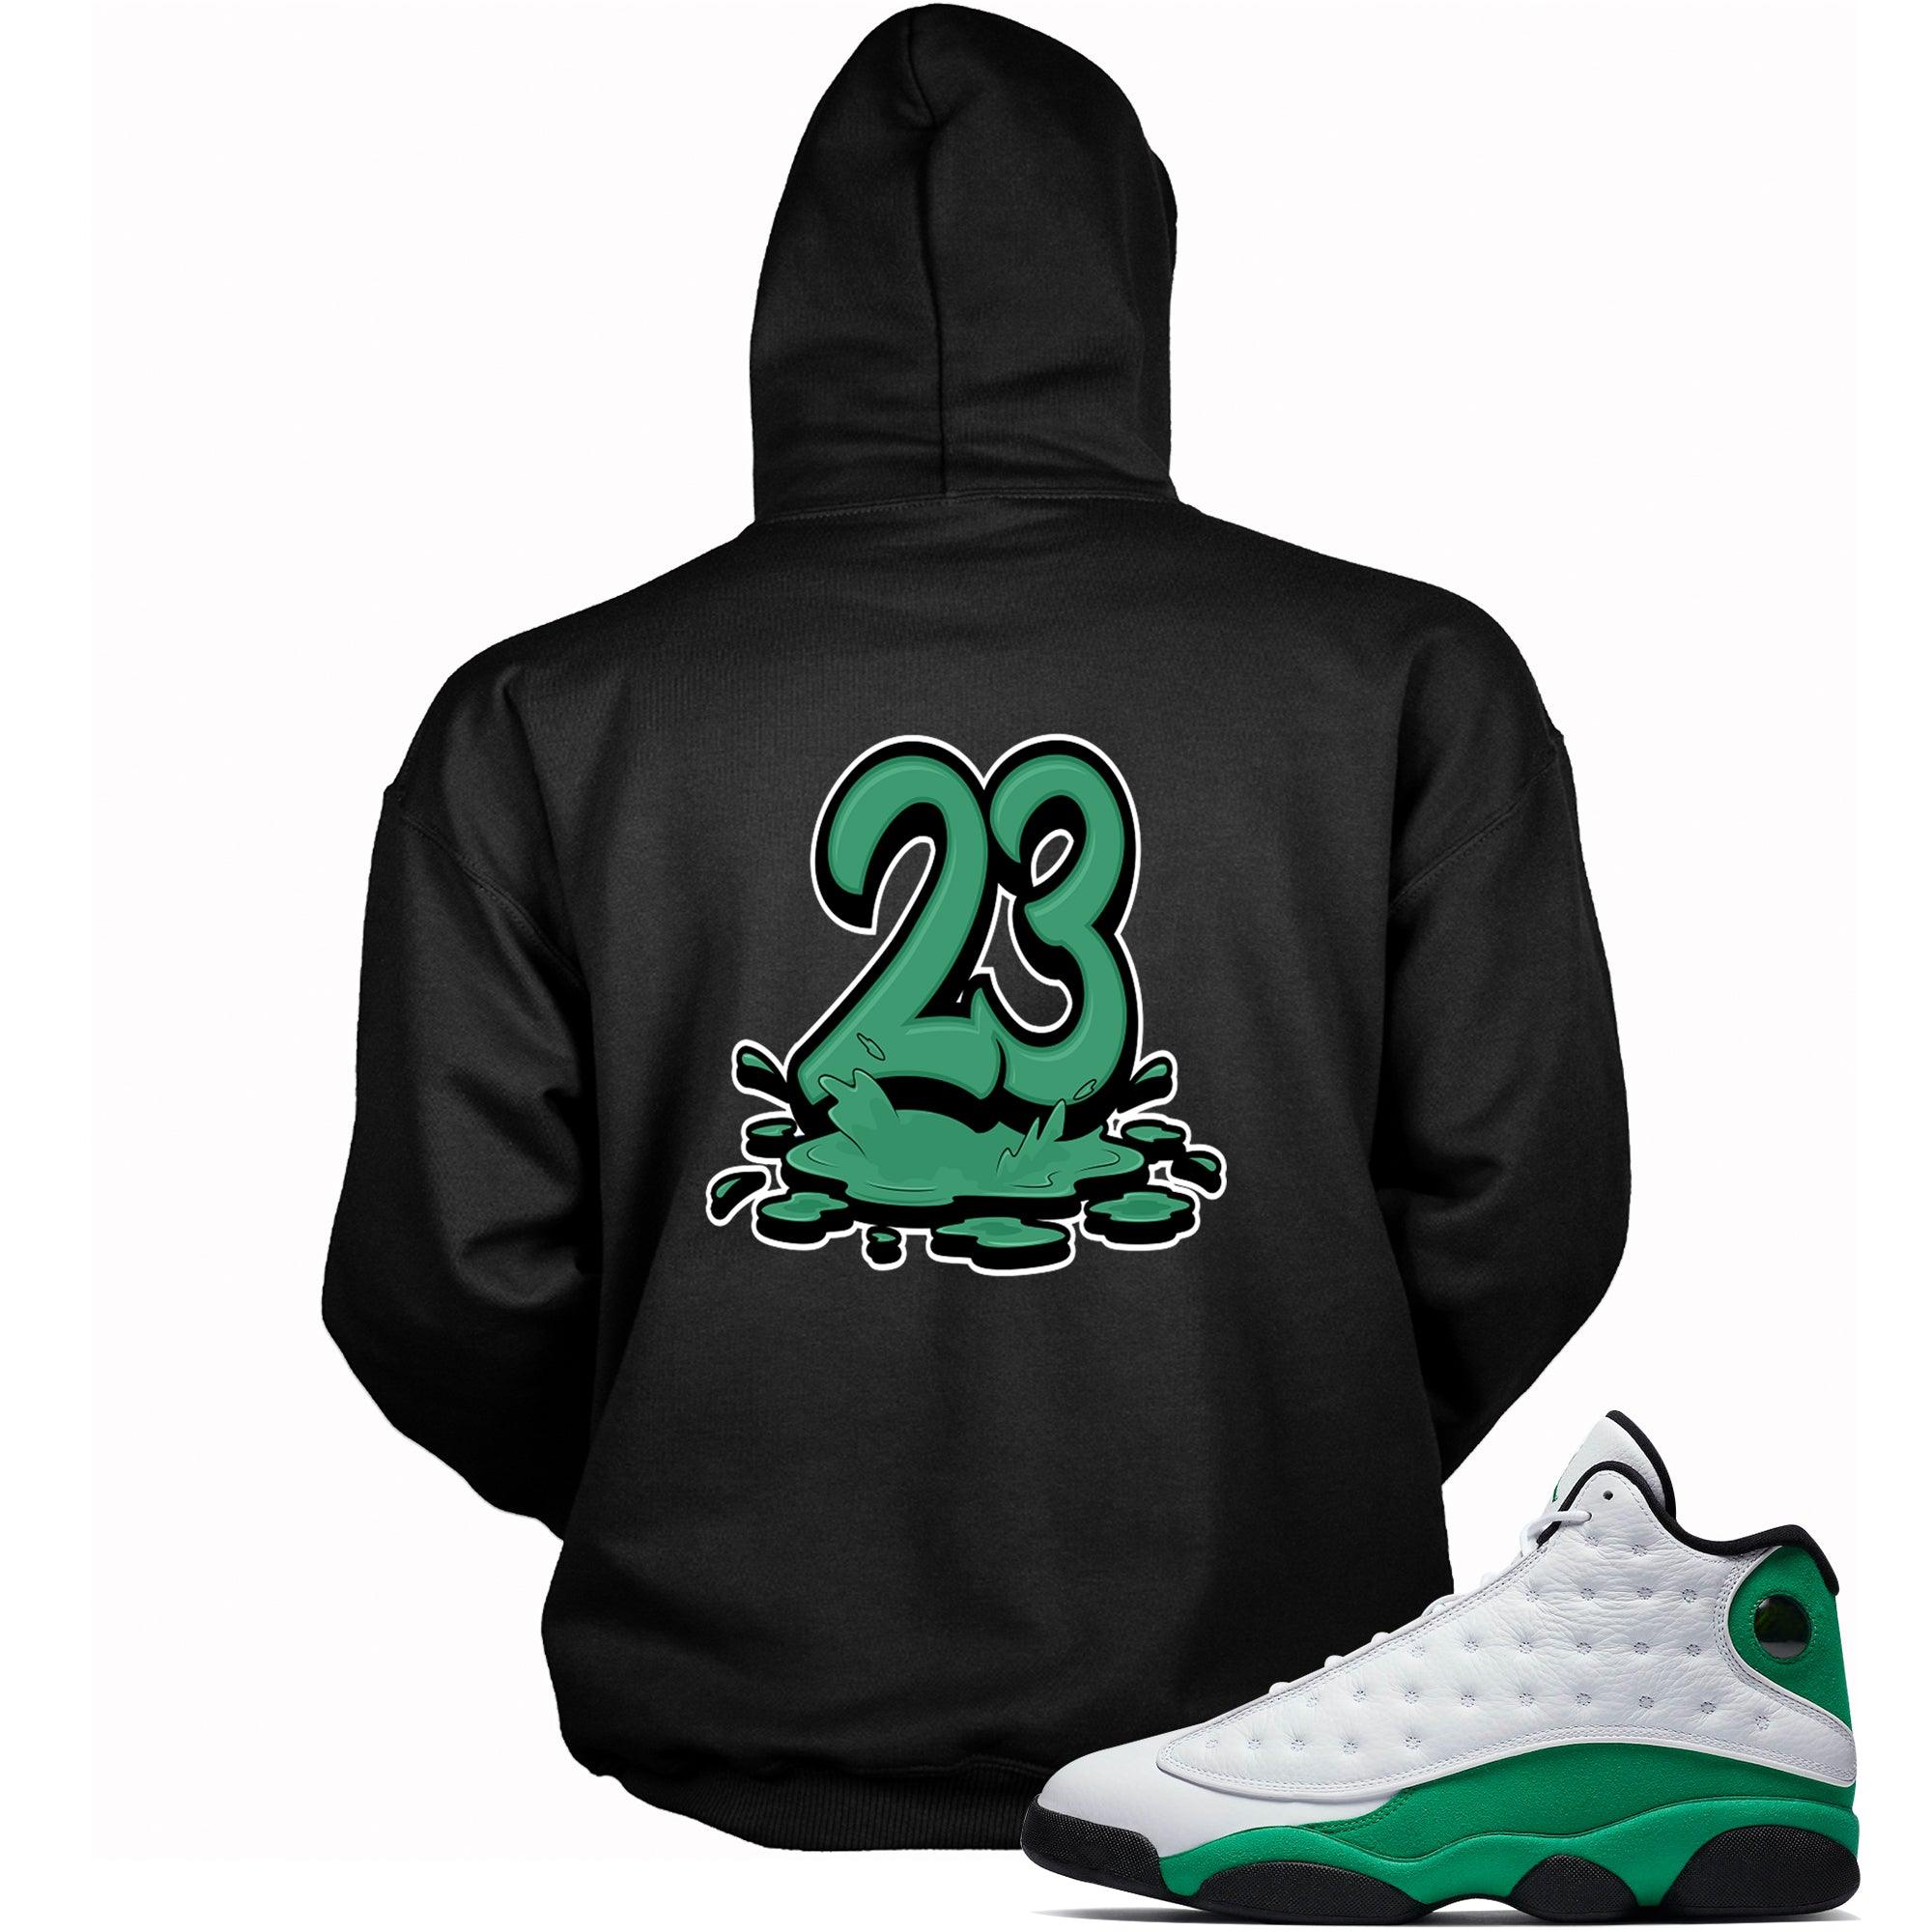 Number 23 Melting Hoodie AJ 13 Lucky Green photo